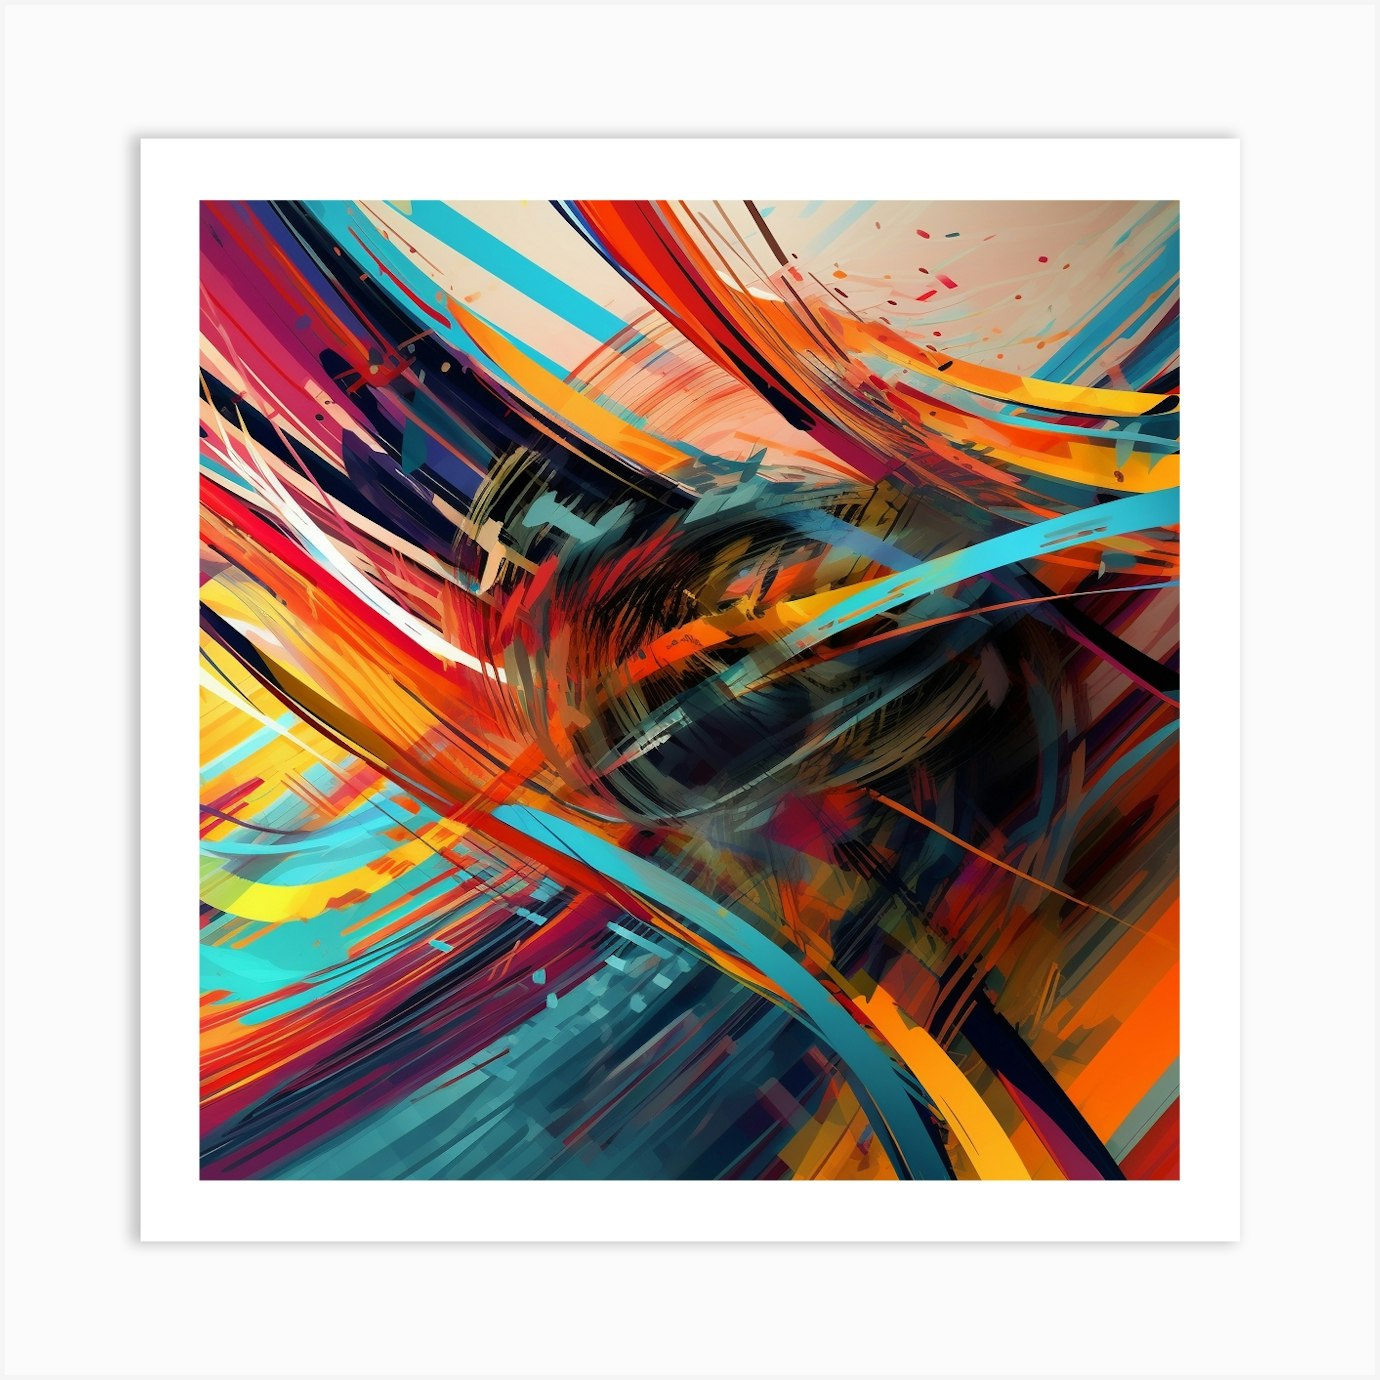 Illustration Composition in Abstract Art, vibrant colors, wall art prints